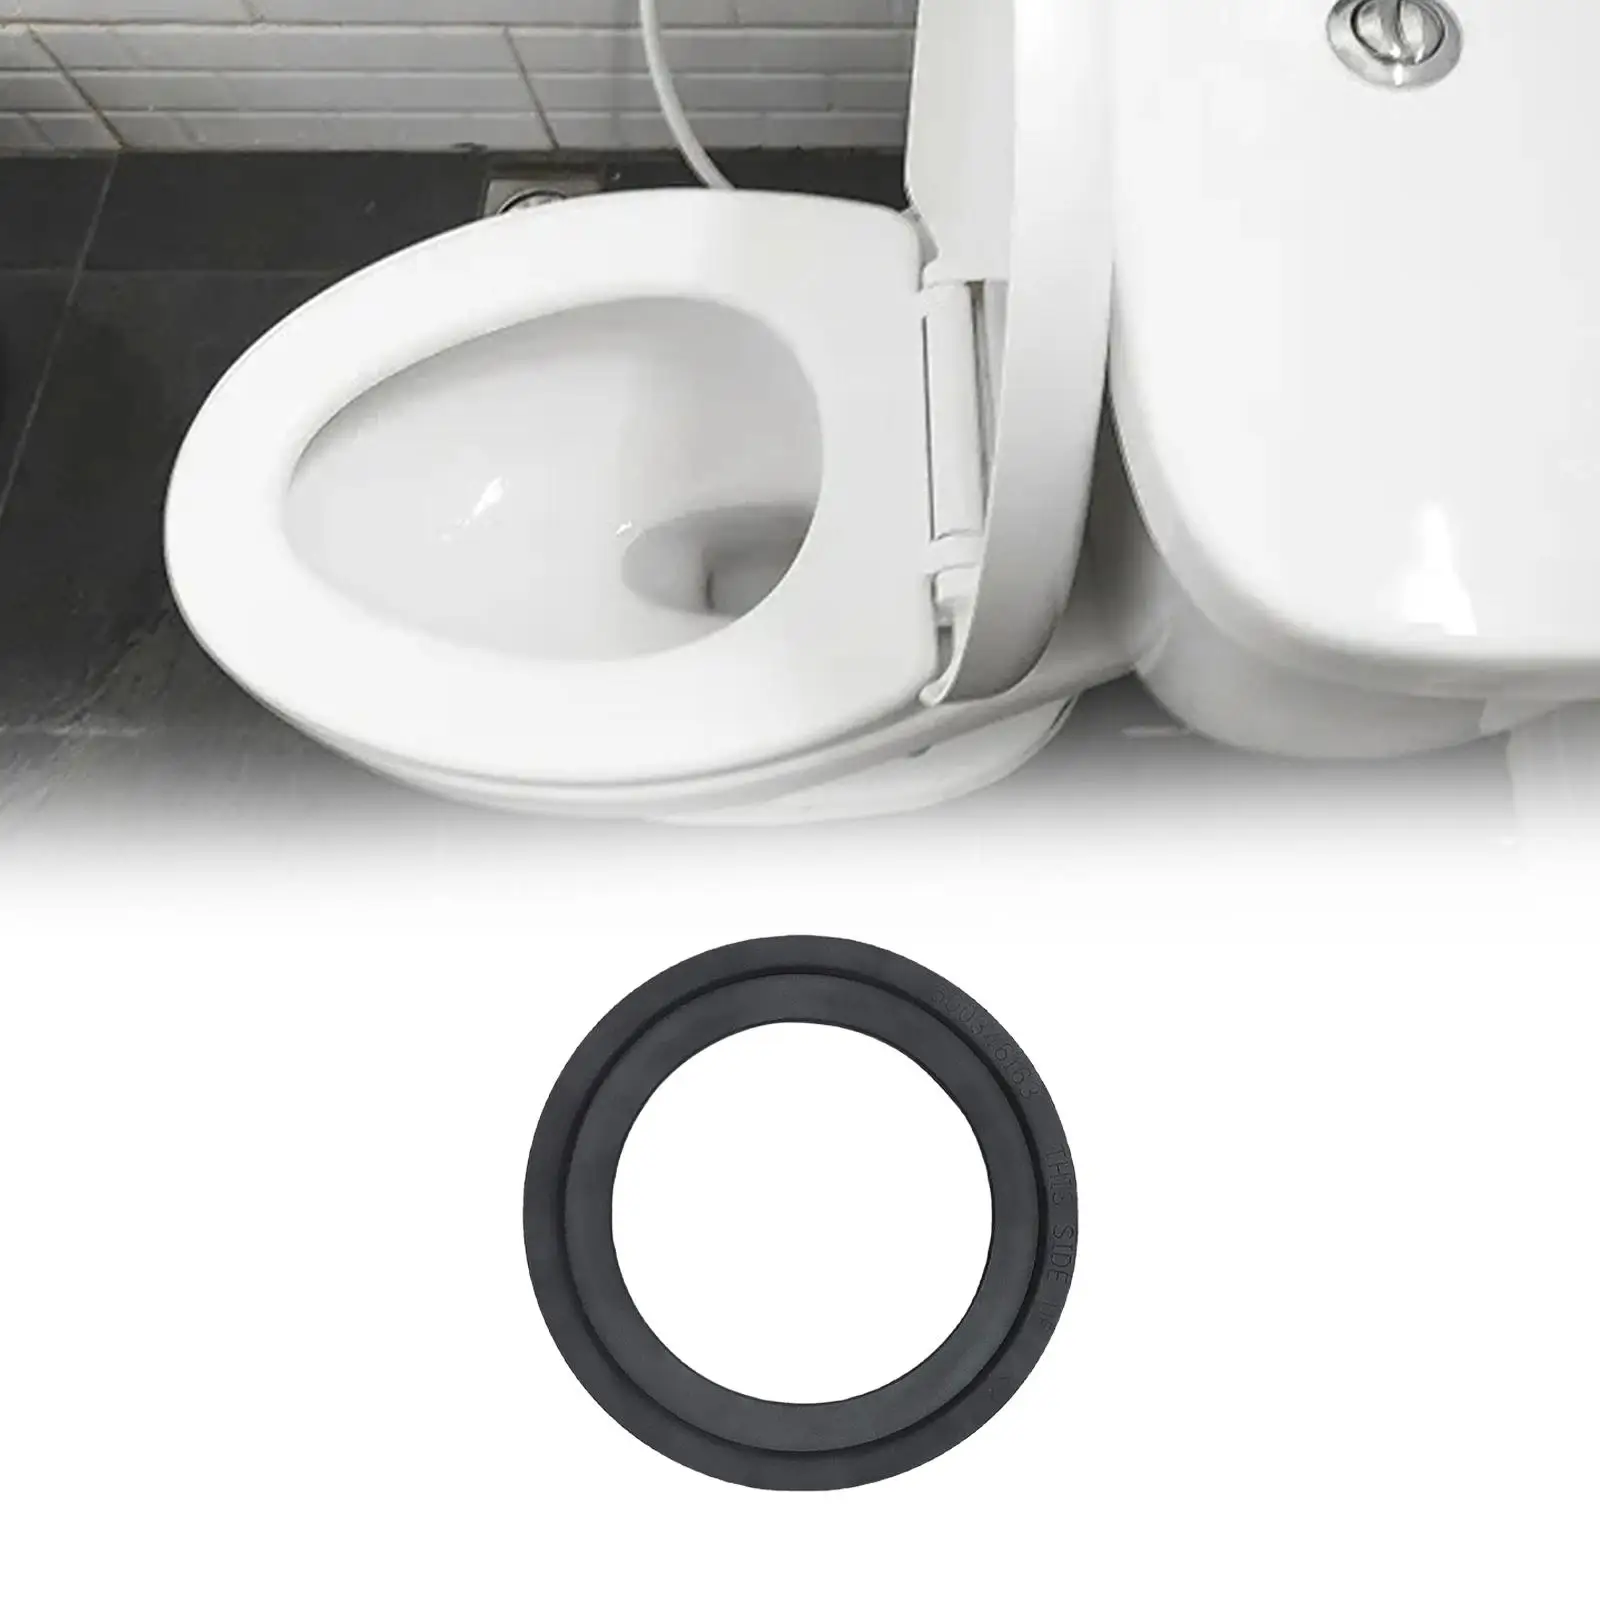 RV Toilet Flush Seal Gaskets Replace Parts for Dometic 300 310 320 RV Toilet Parts Easy Installation Stable Performance